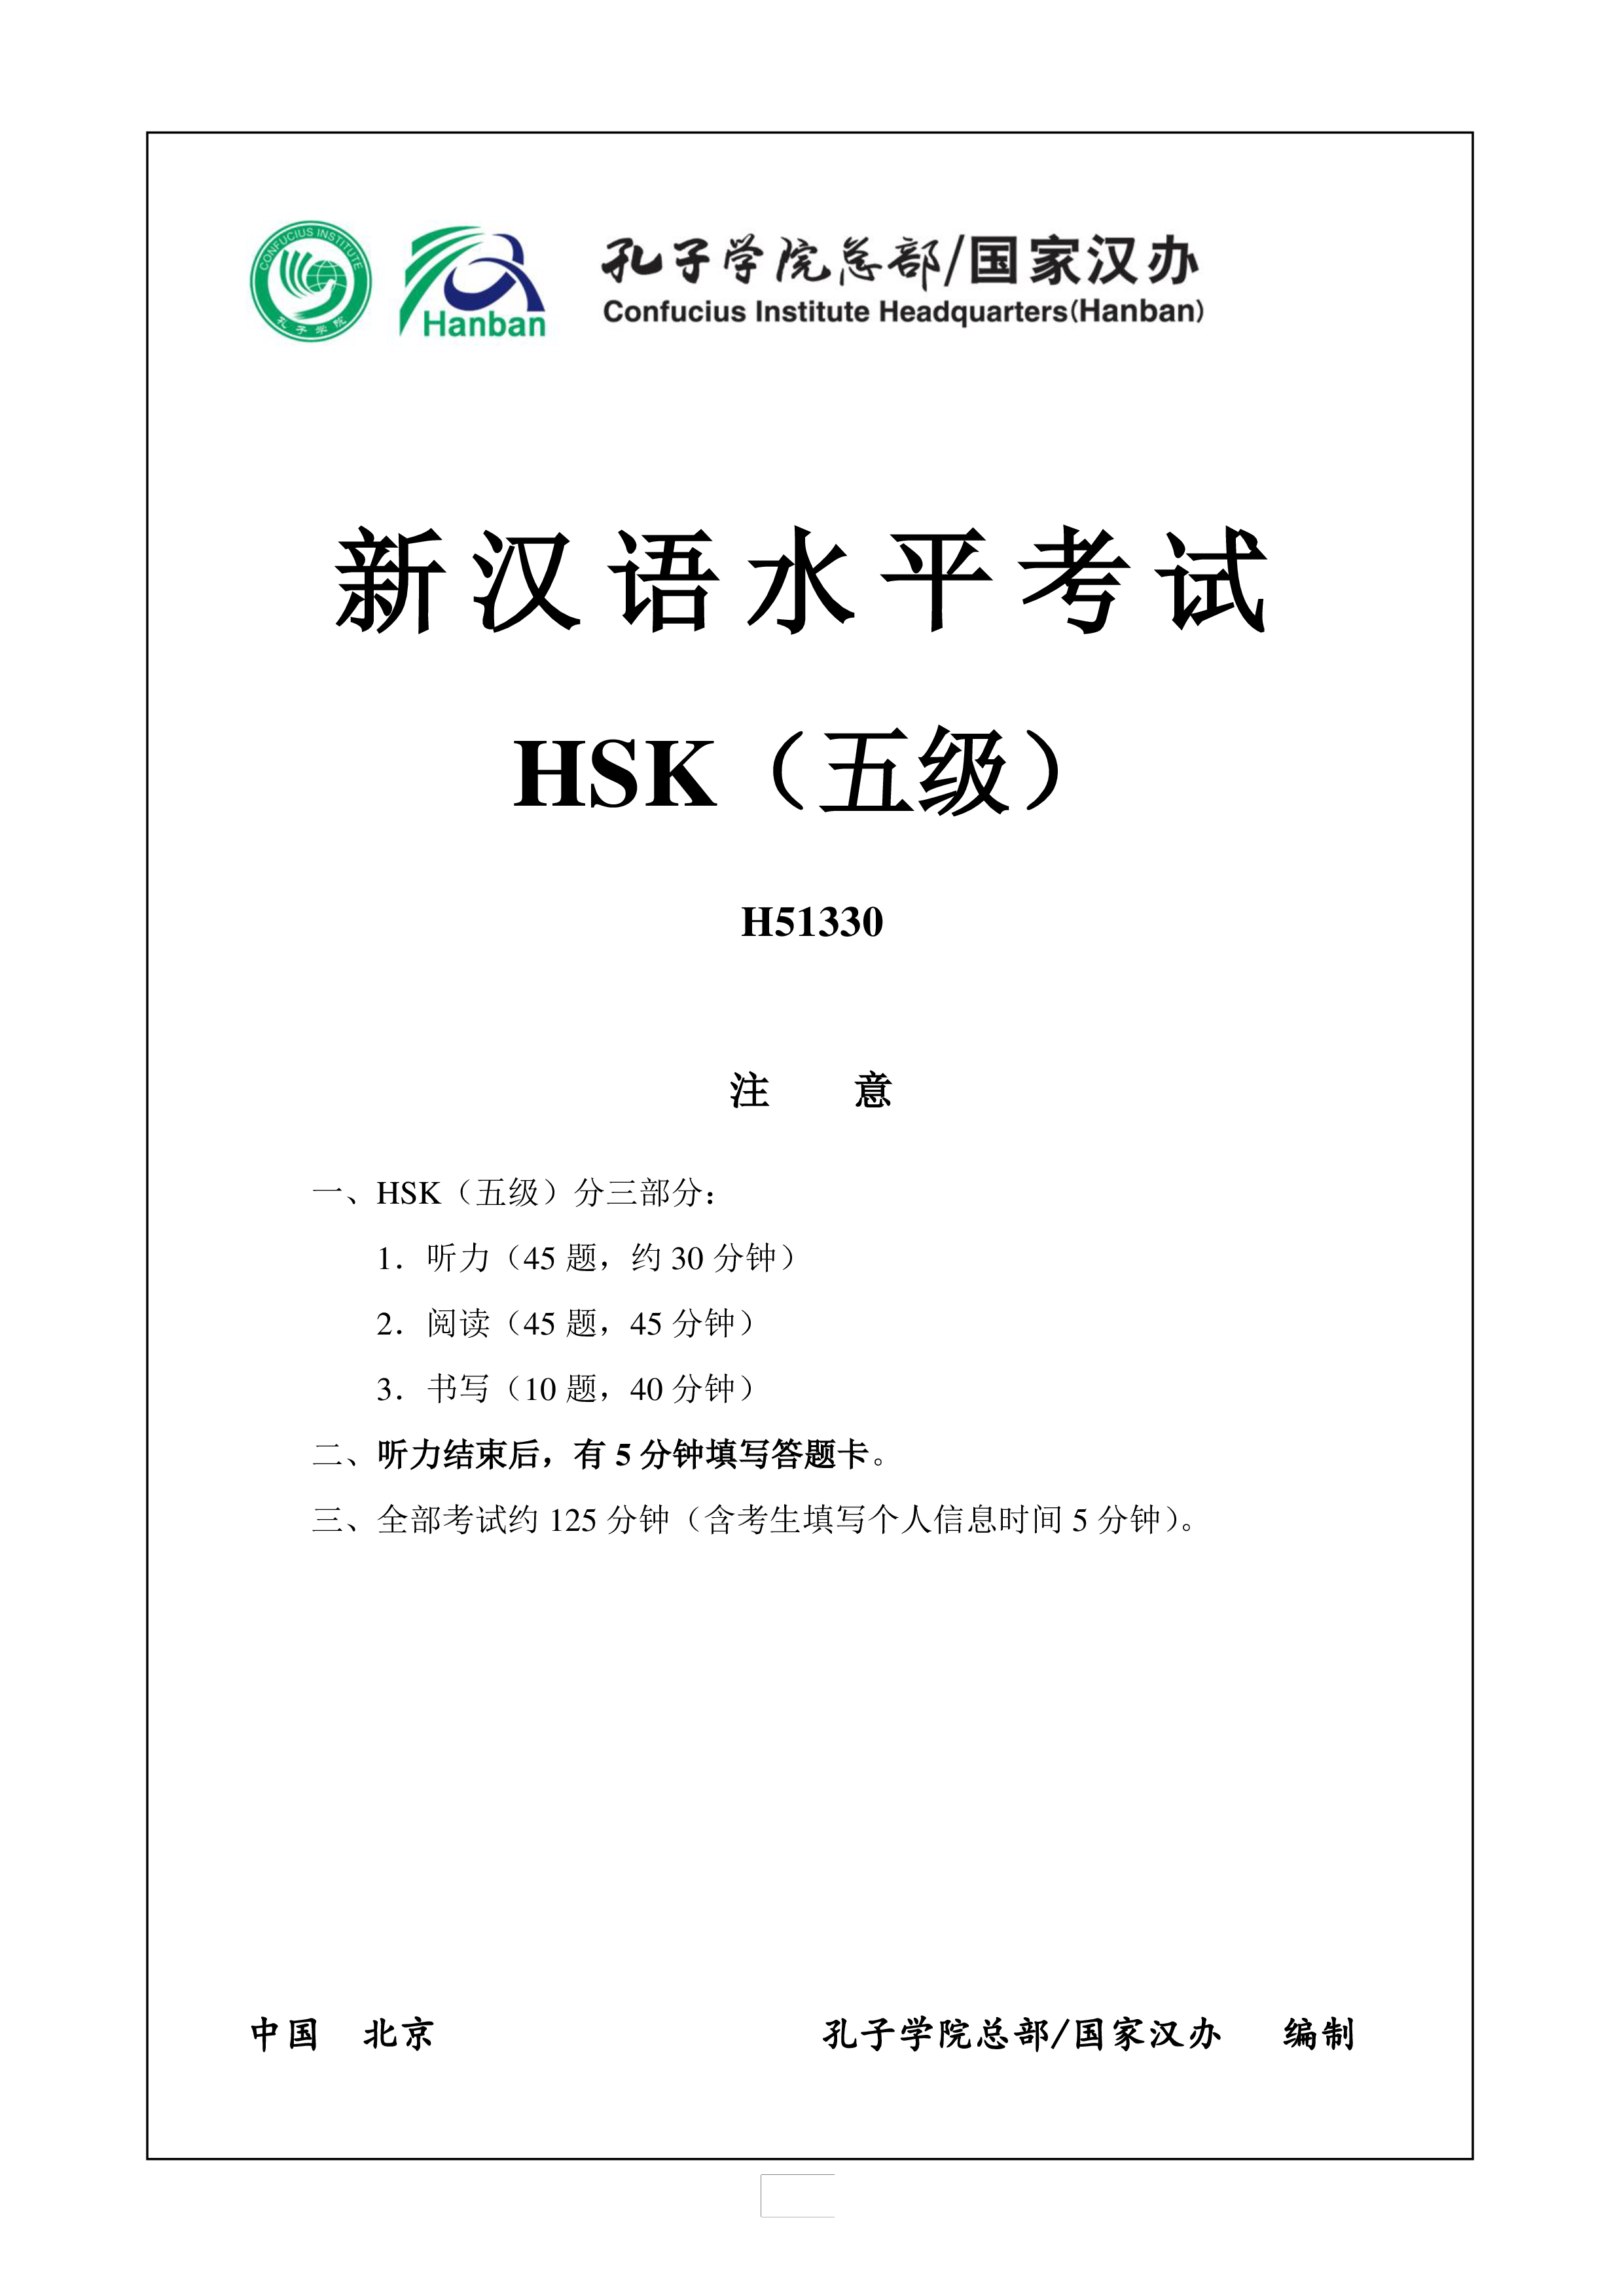 hsk5 chinese exam, incl audio and answer # h51330 template